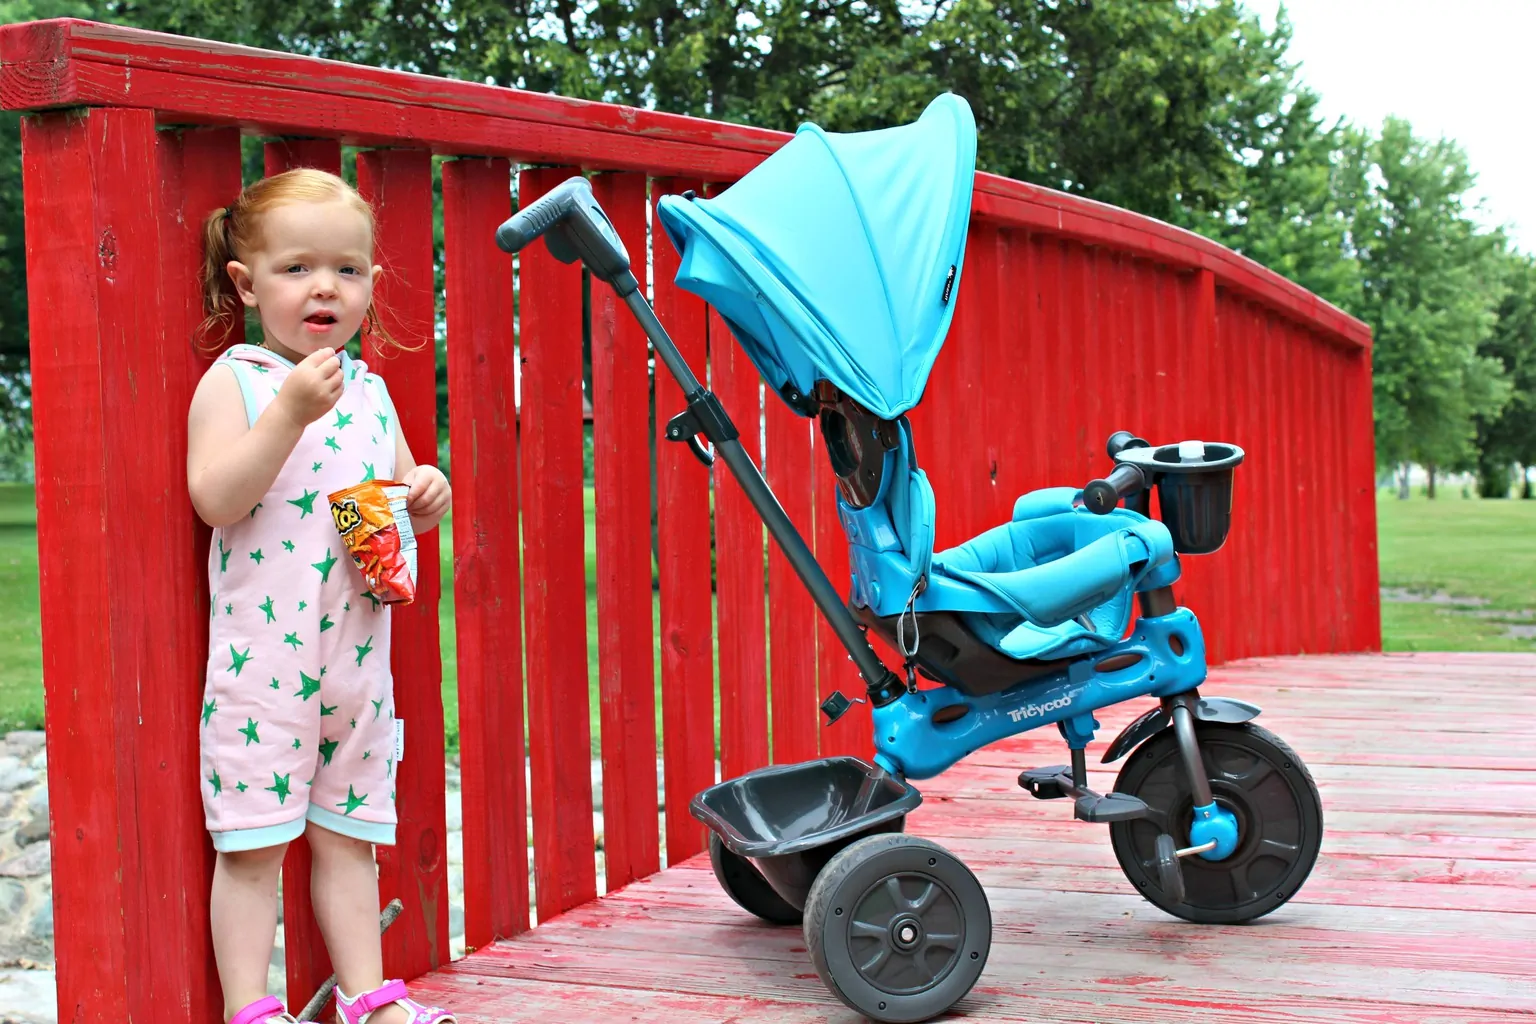 Get Your Toddler Outside With A Scavenger Hunt & The Joovy Tricycoo 4.1. Now that Summer is in full swing, now's the perfect time to find some exciting ways to get the kids outdoors. It's easy for big kids to stay entertained as they are typically quite independent. However, if you're looking for a fun activity for your toddler, head outside together and go on this fun Toddler Scavenger Hunt! Take the Joovy Tricycoo along as it's a A tricycle that grows with your child. Quickly change from a parent assisted ride to a kid powered tricycle. {Thrifty Nifty Mommy}